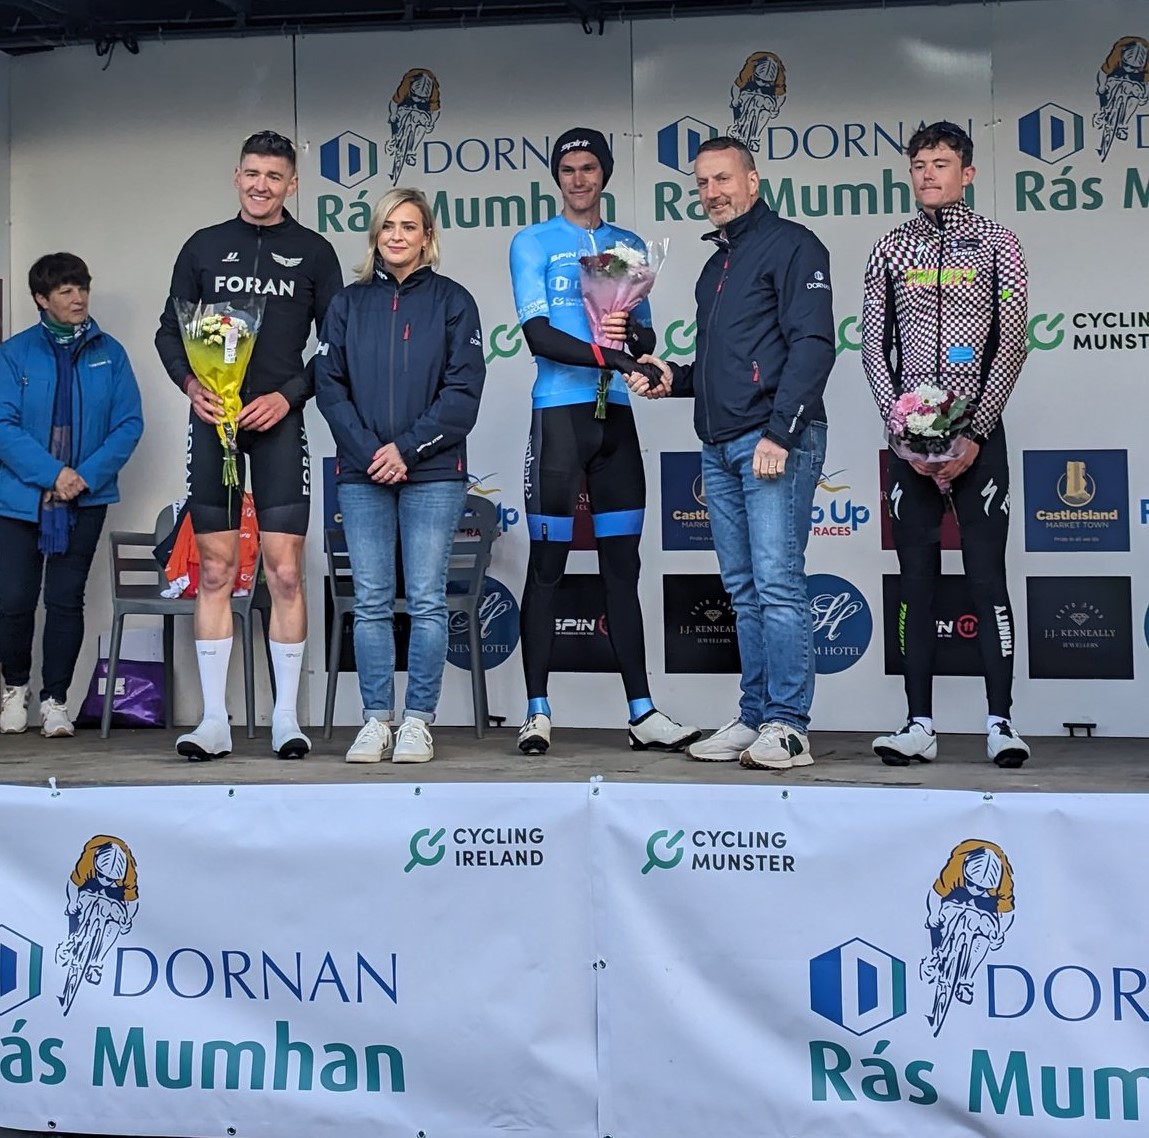 Dornan Engineering is the title sponsor of the 2024 Ras Mumhan cycle that took place over the Easter Weekend, working alongside Cycling Ireland and Cycling Munster, with Micheal O'Connor, Group Managing Director.